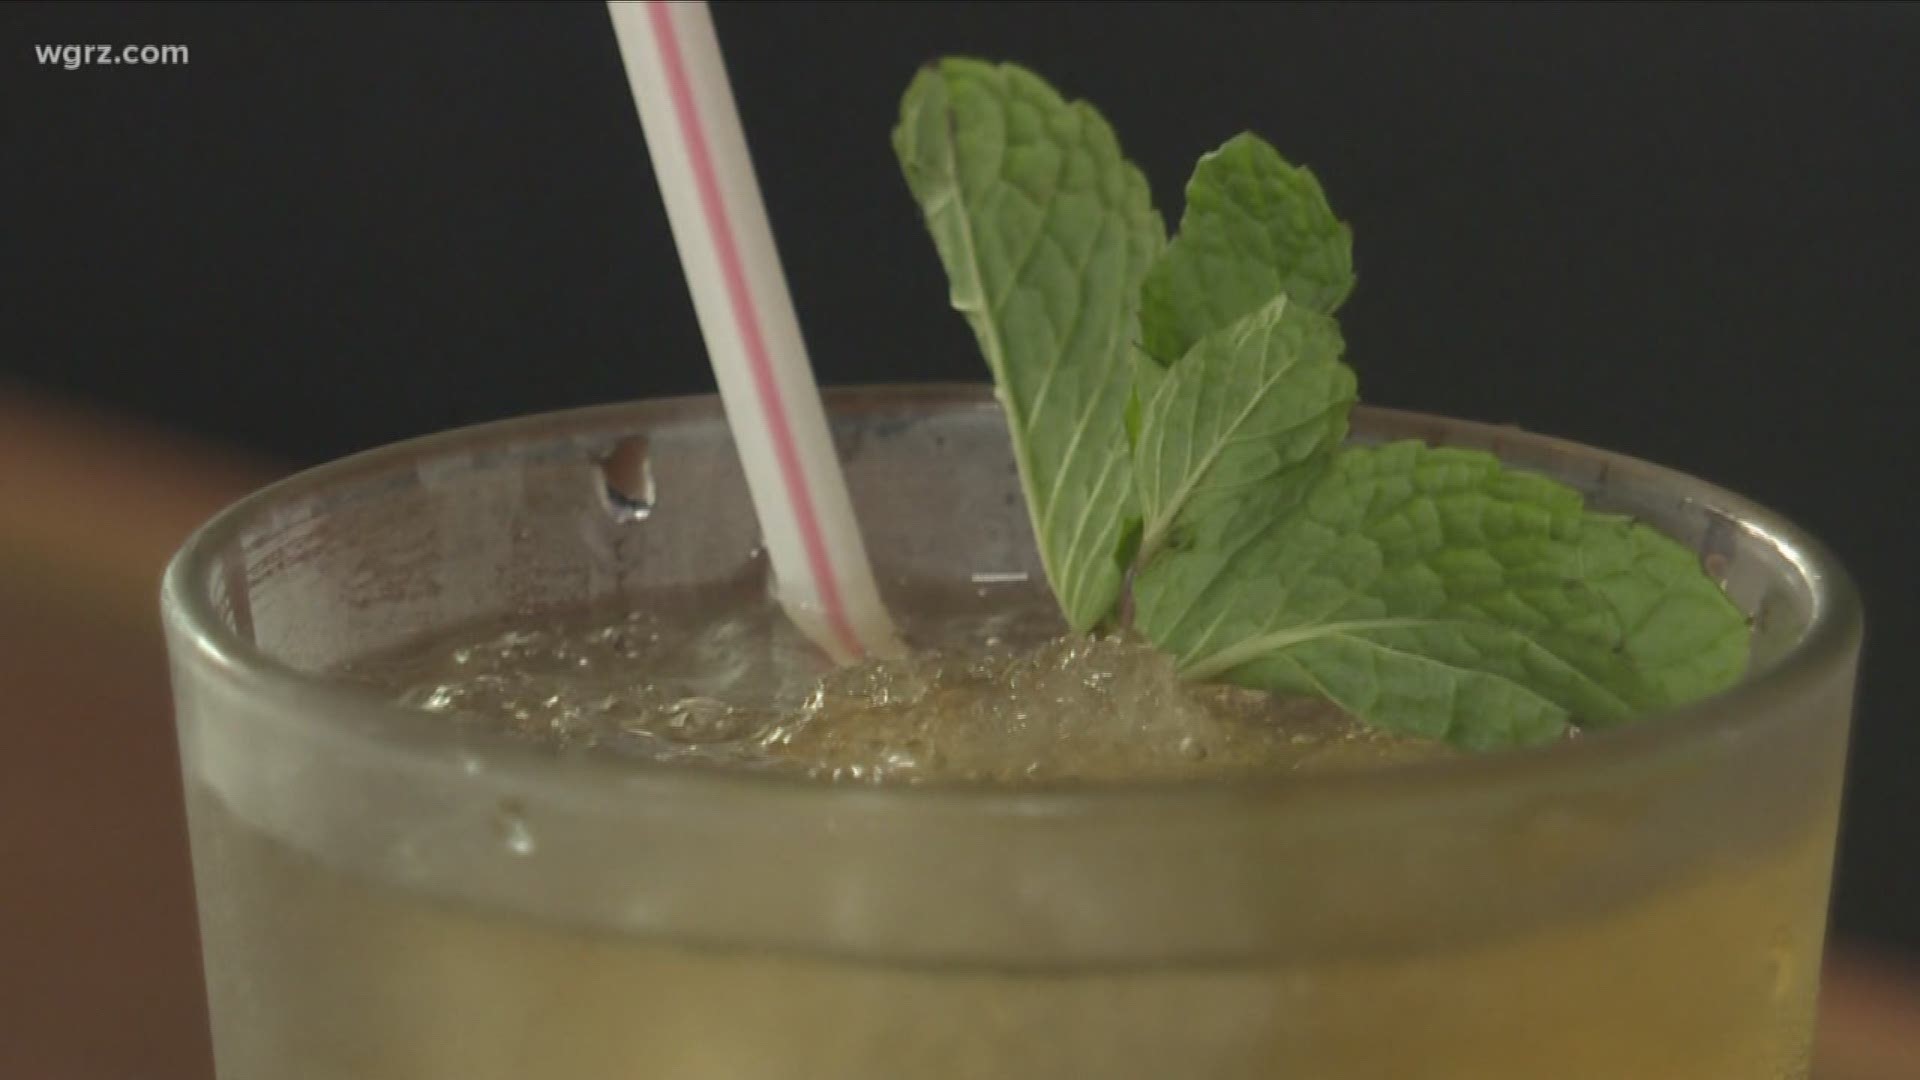 Derby Day celebrations kicked off in Buffalo today ahead of the Kentucky Derby.